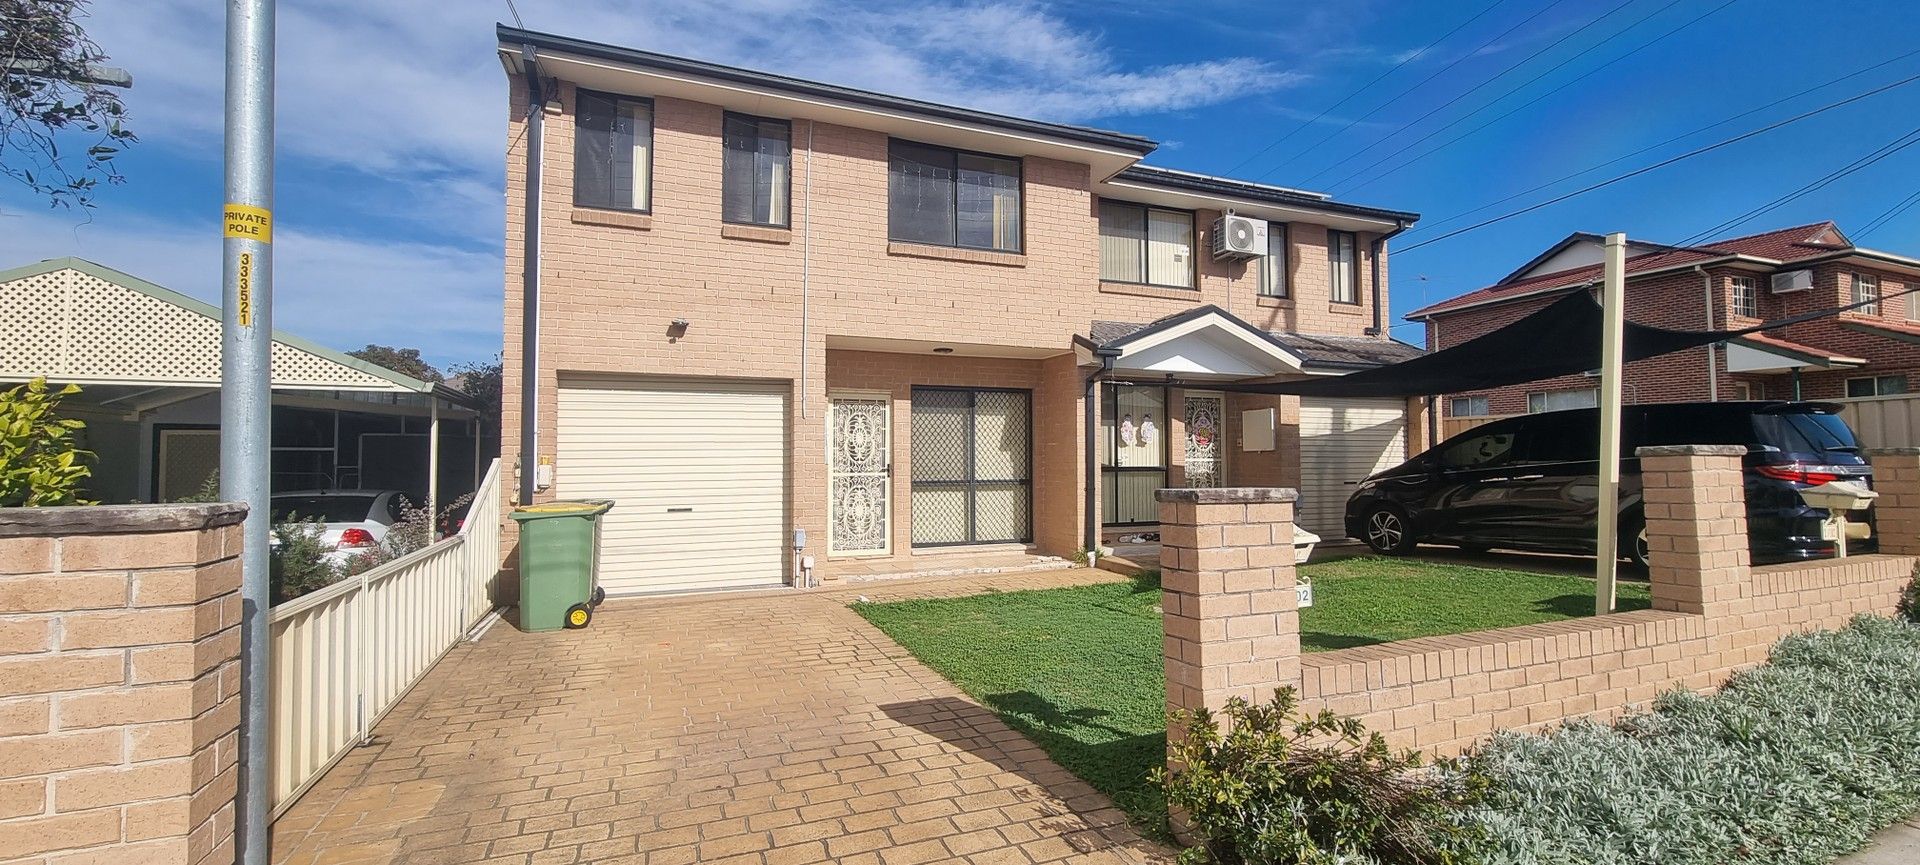 1/102 Arbutus Street, Canley Heights NSW 2166, Image 0